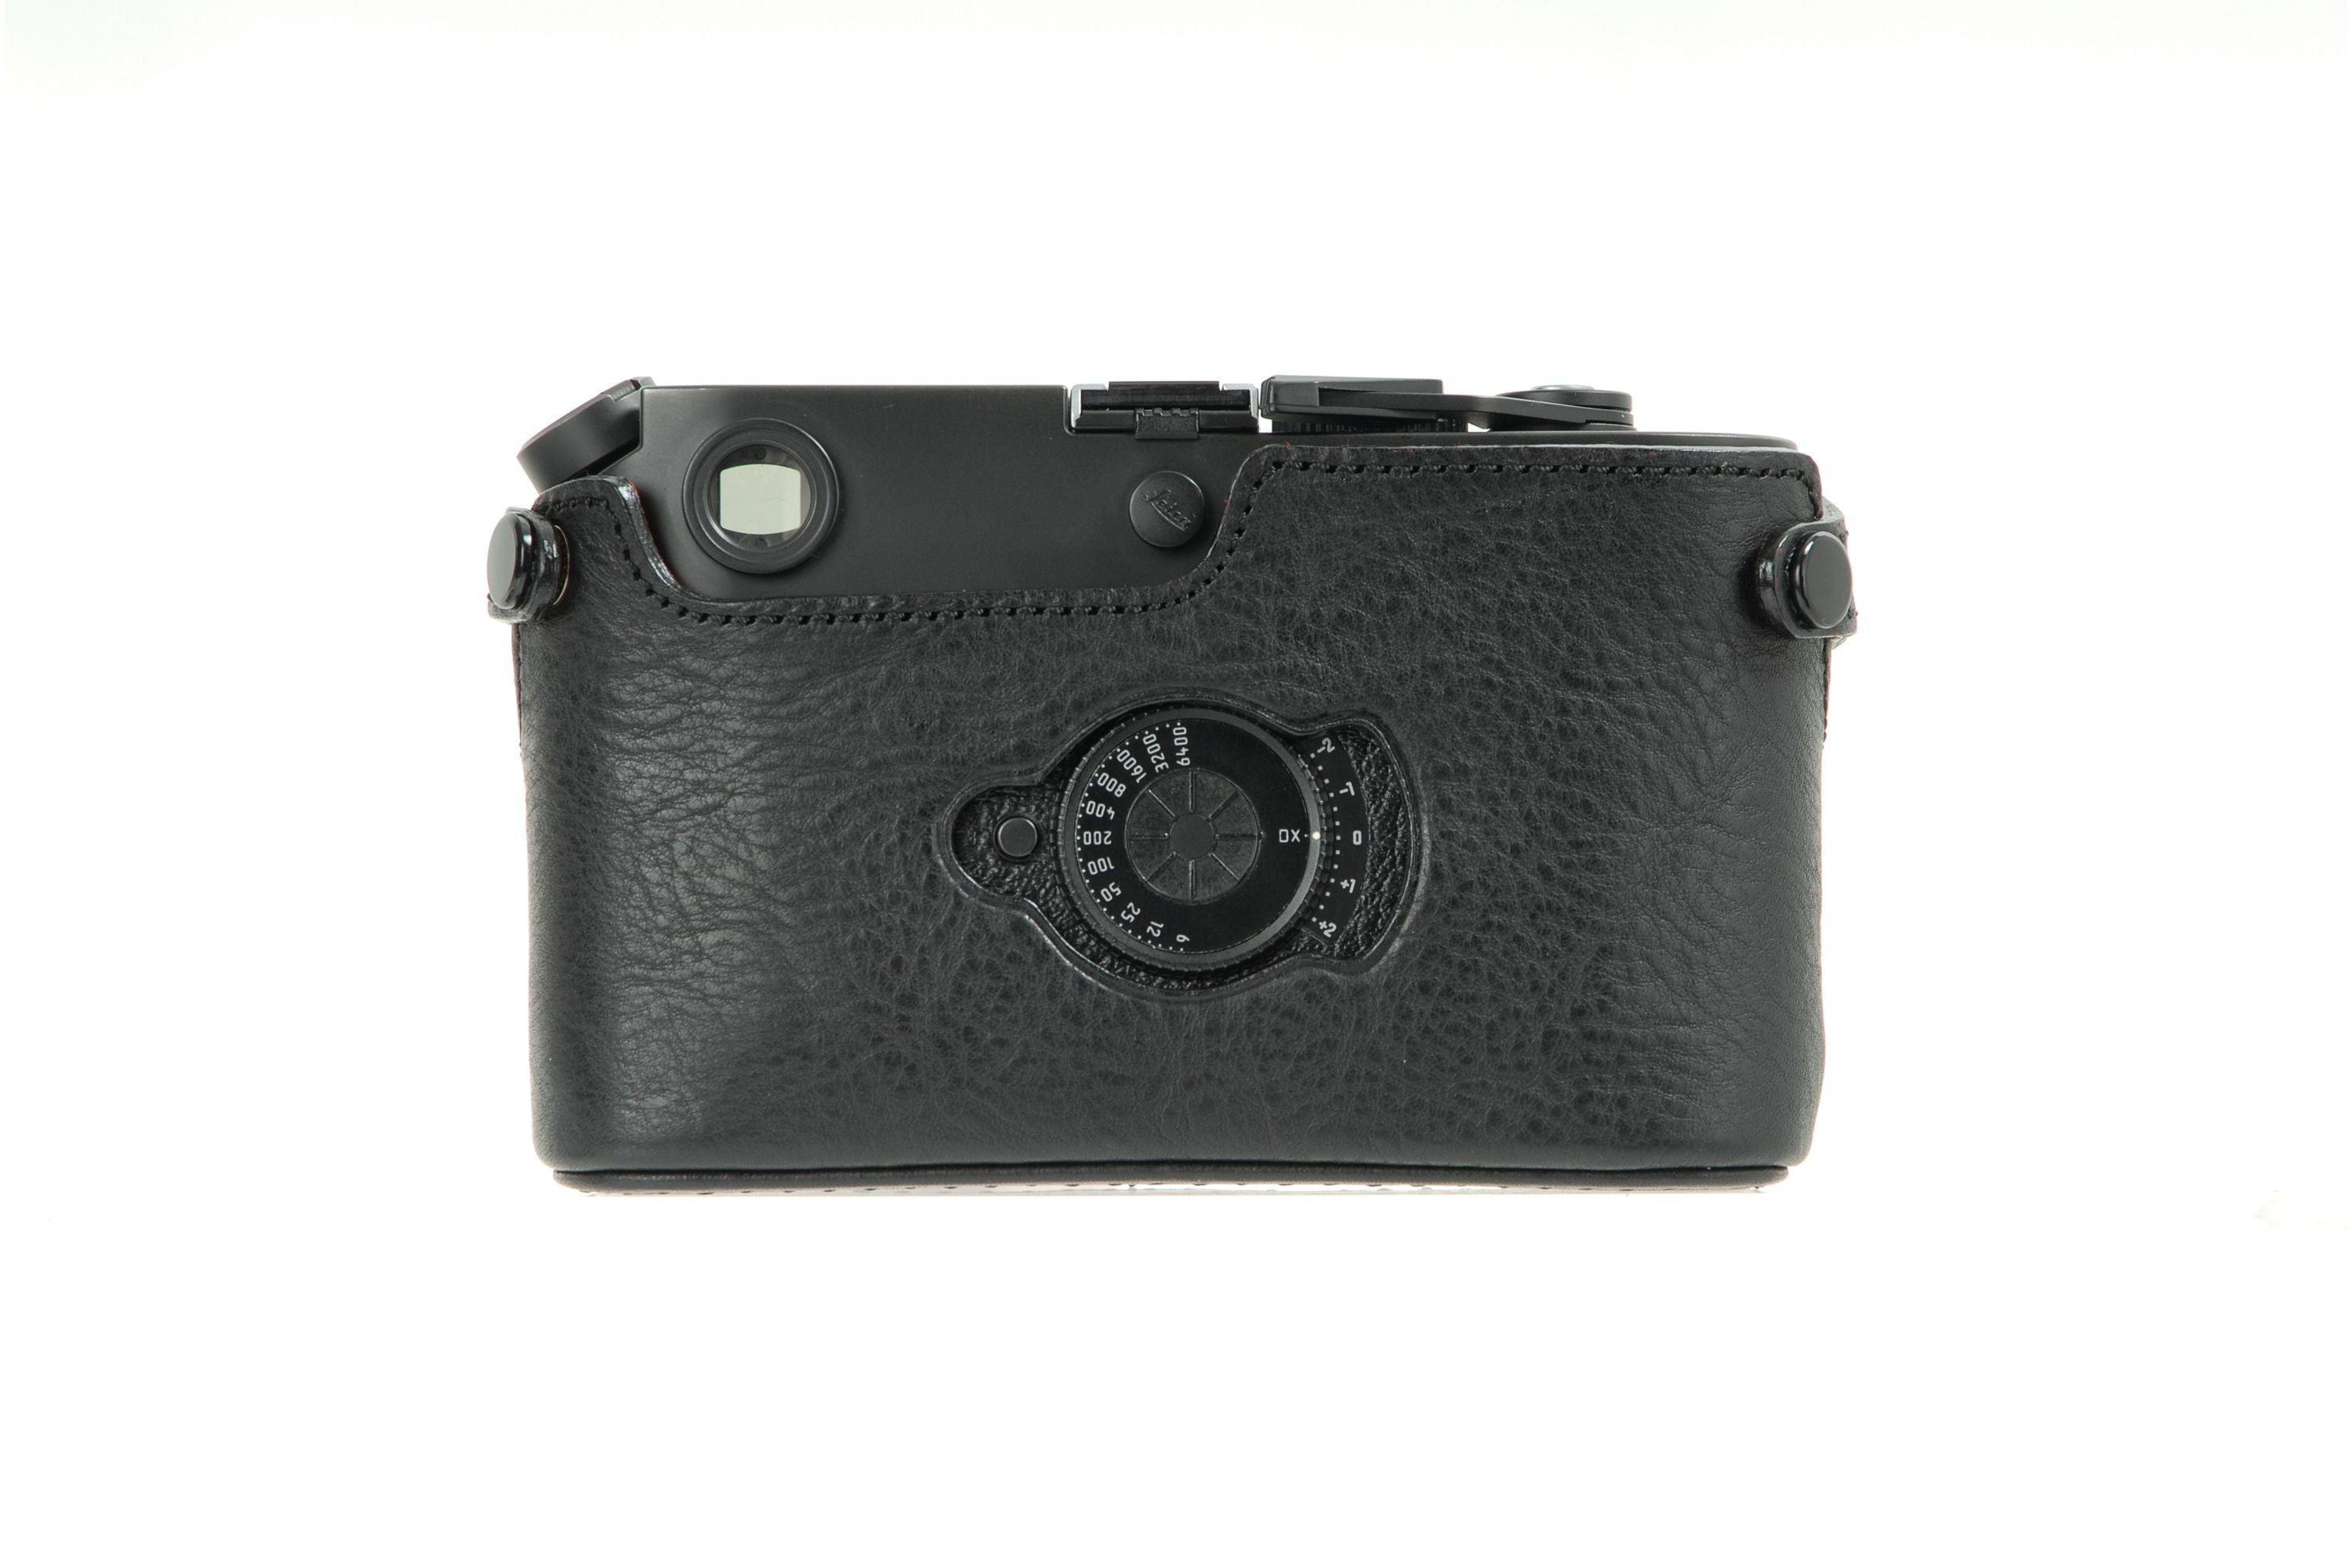 LMB-M7 Leica Body Case - Leather Case for M7 and M6TTL